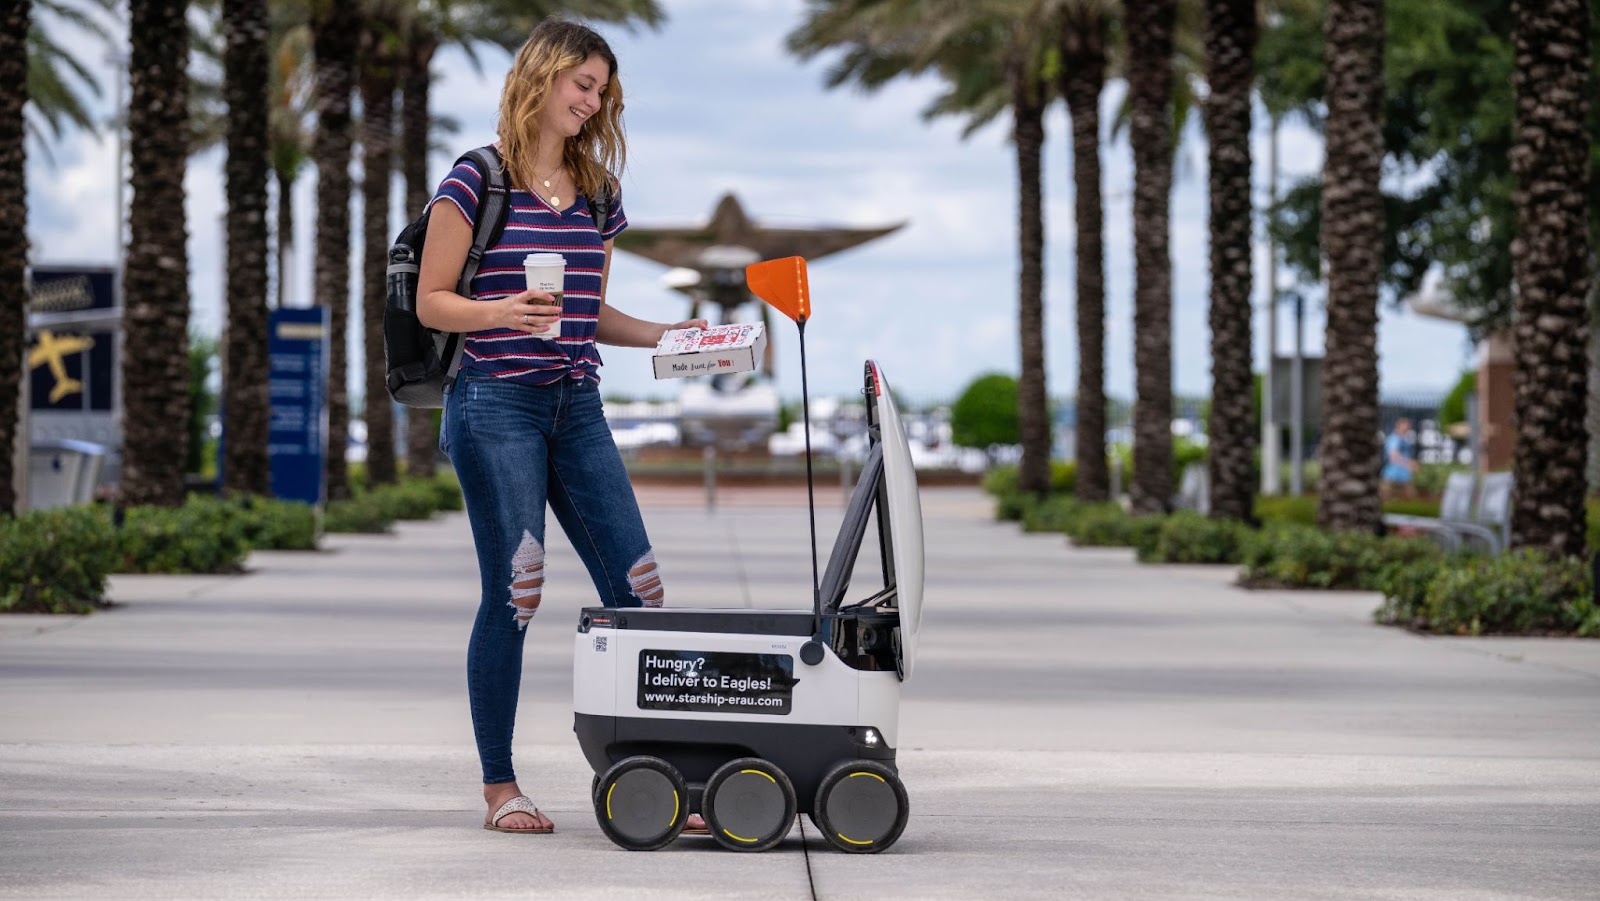 A young woman is standing next to a delivery robot.